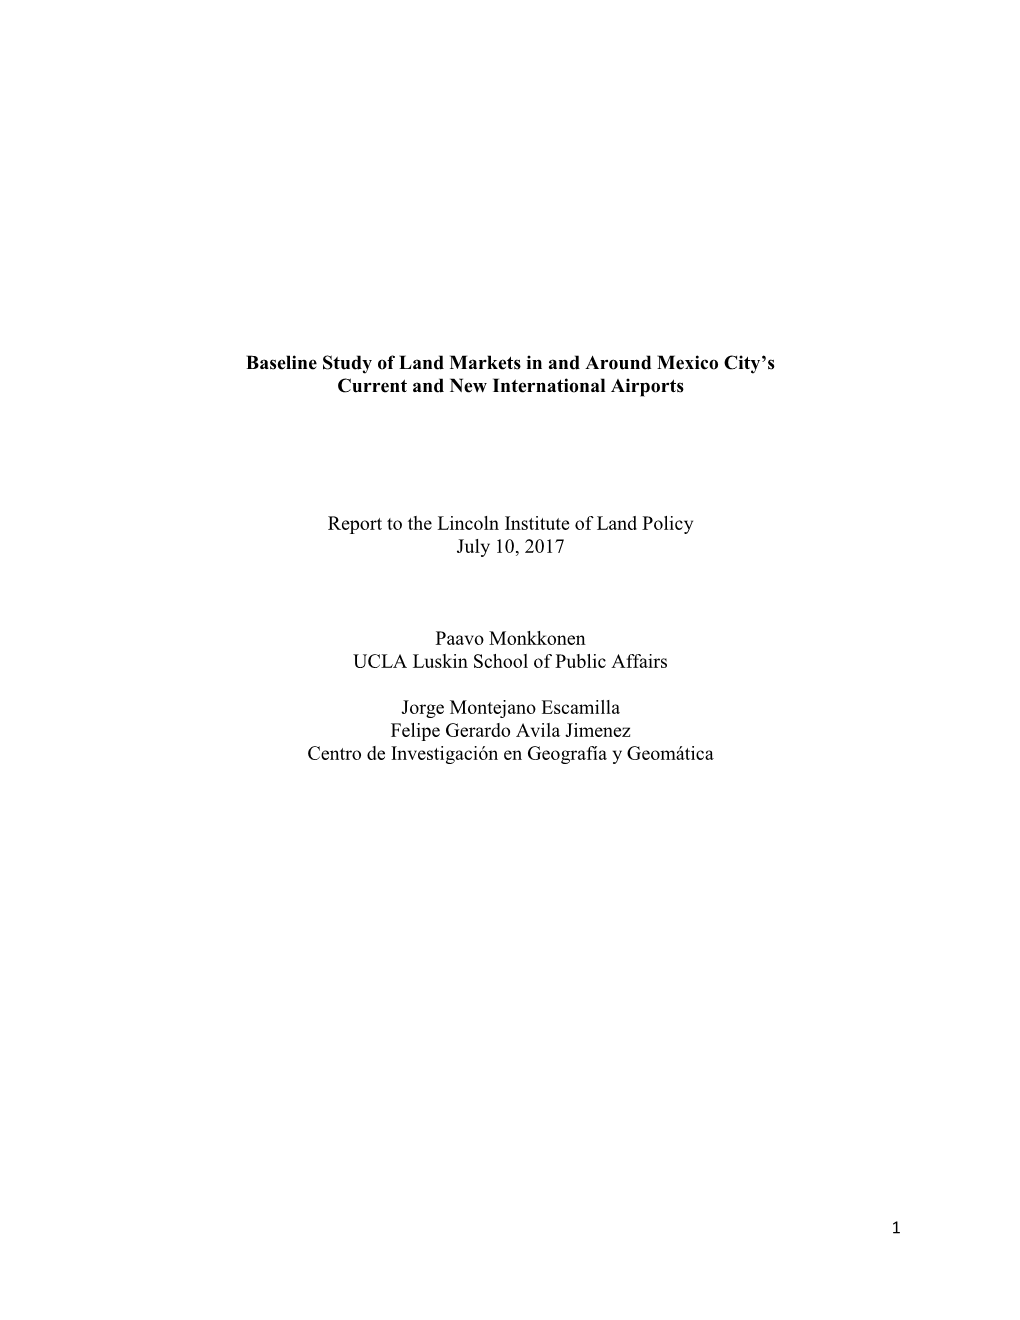 Baseline Study of Land Markets in and Around Mexico City's Current And